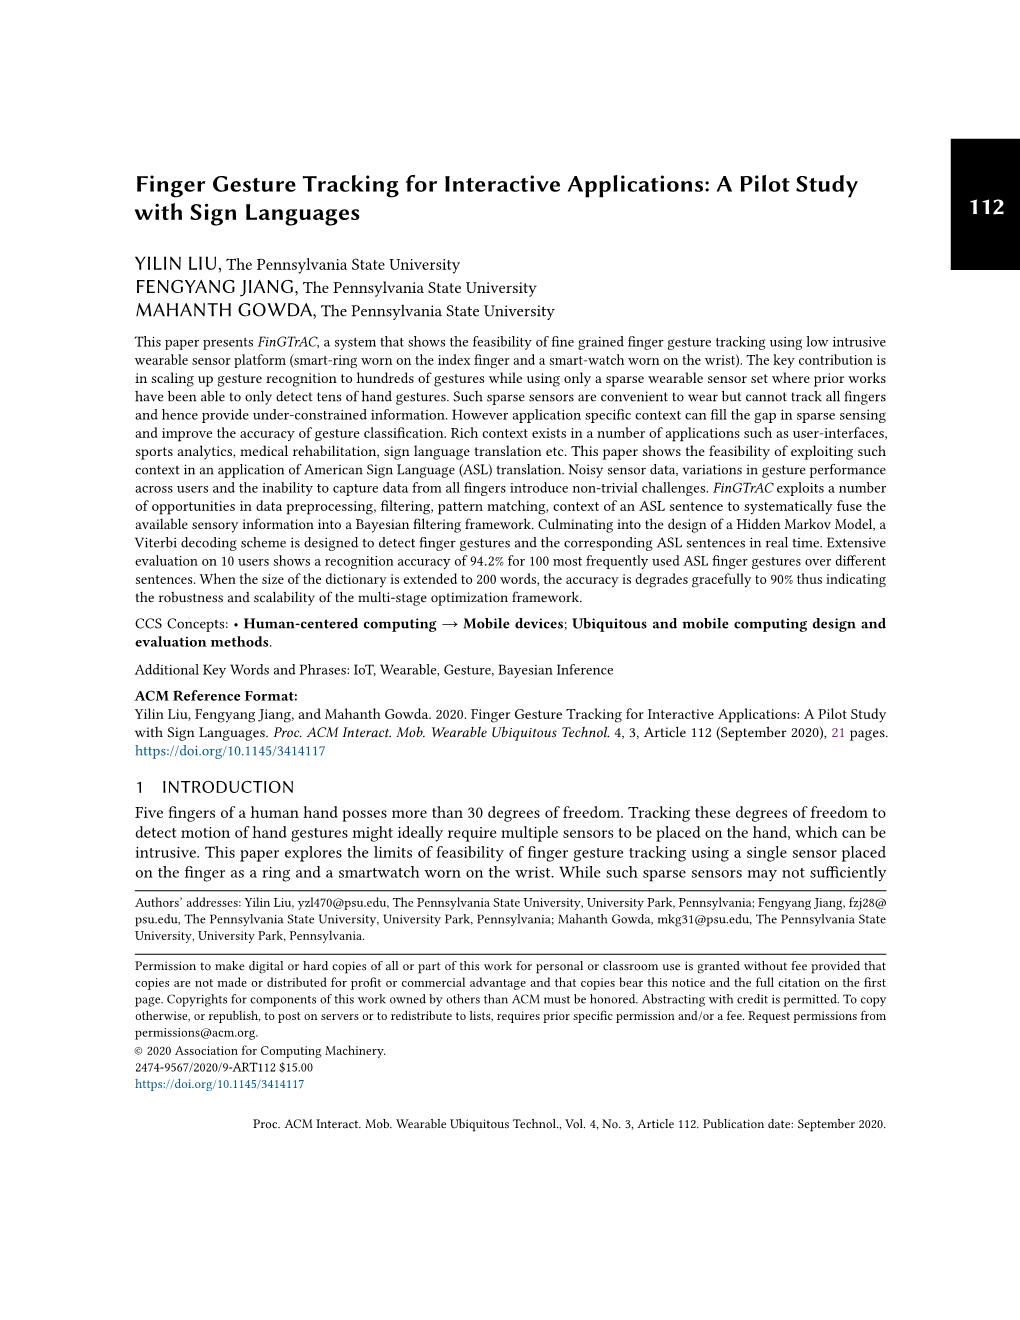 Finger Gesture Tracking for Interactive Applications: a Pilot Study with Sign Languages 112